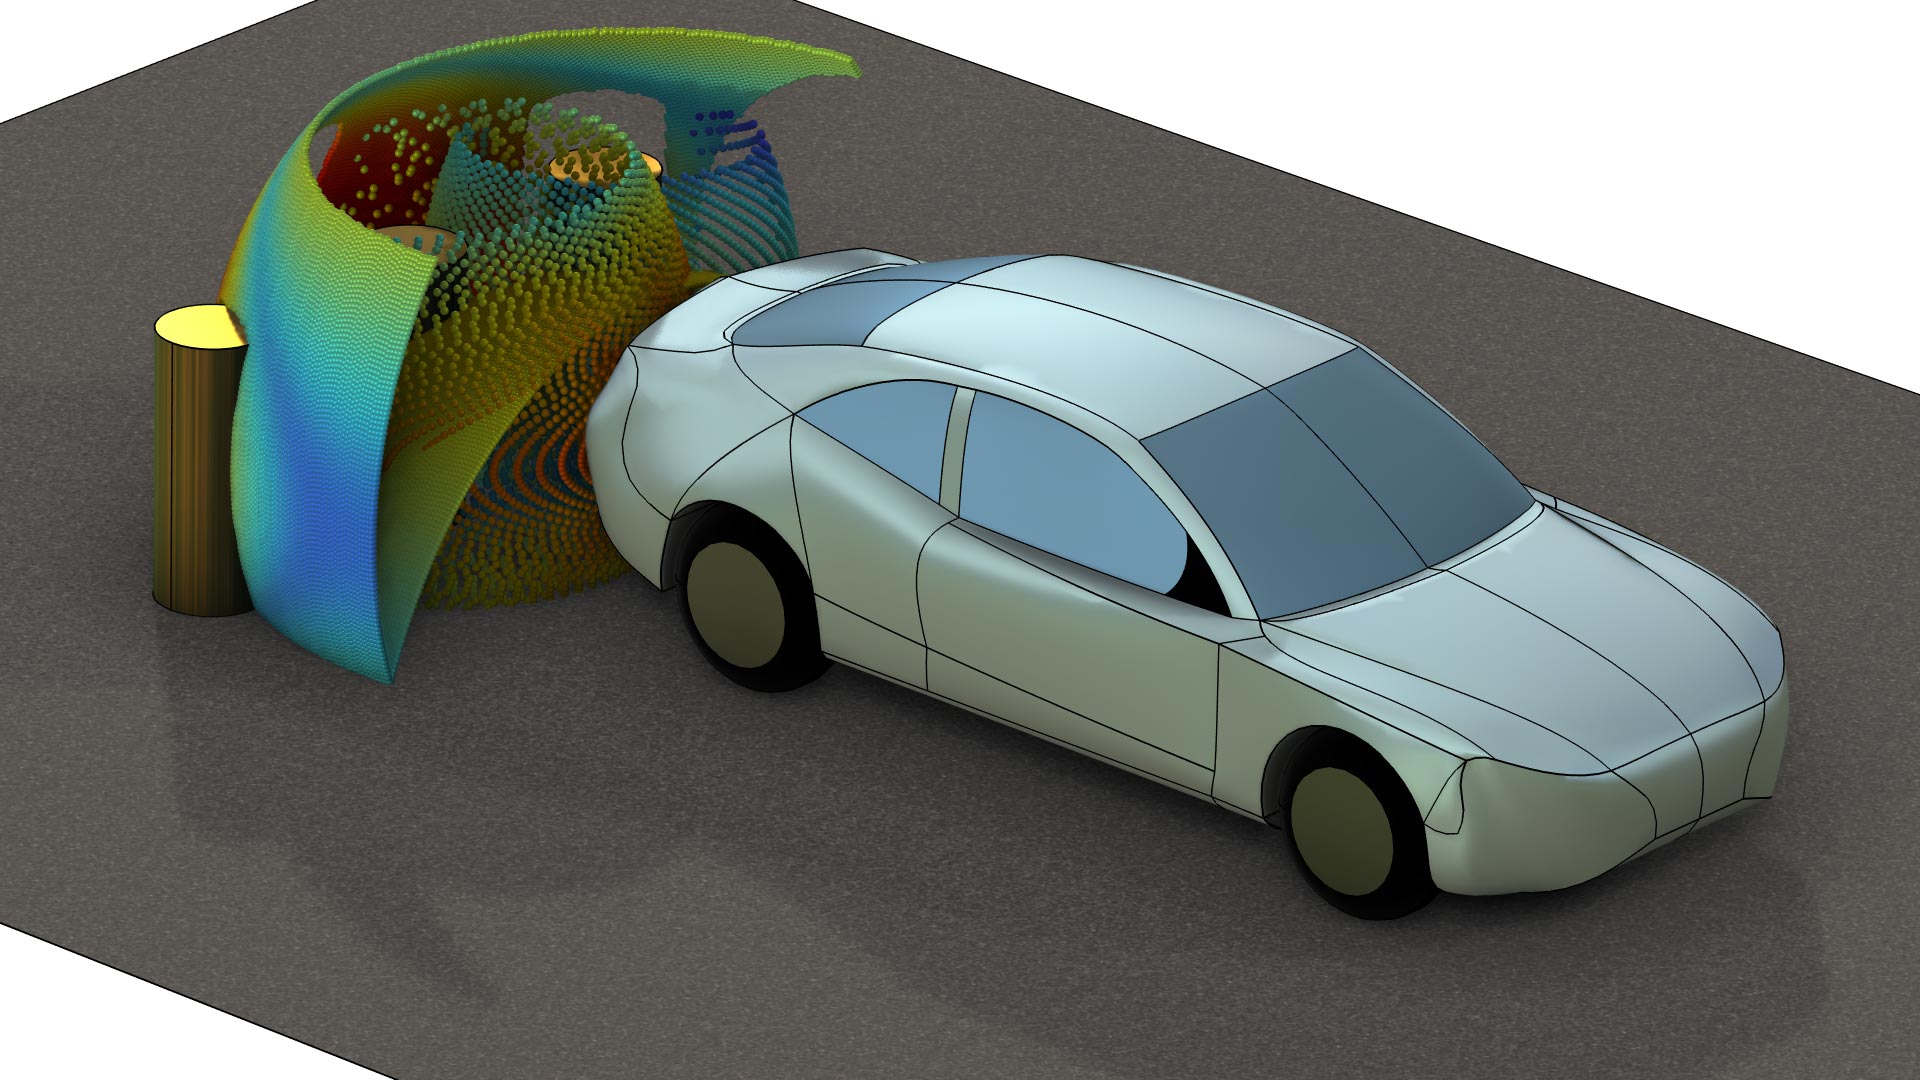 A car model showing the radiation pattern in particles in the Rainbow color table.